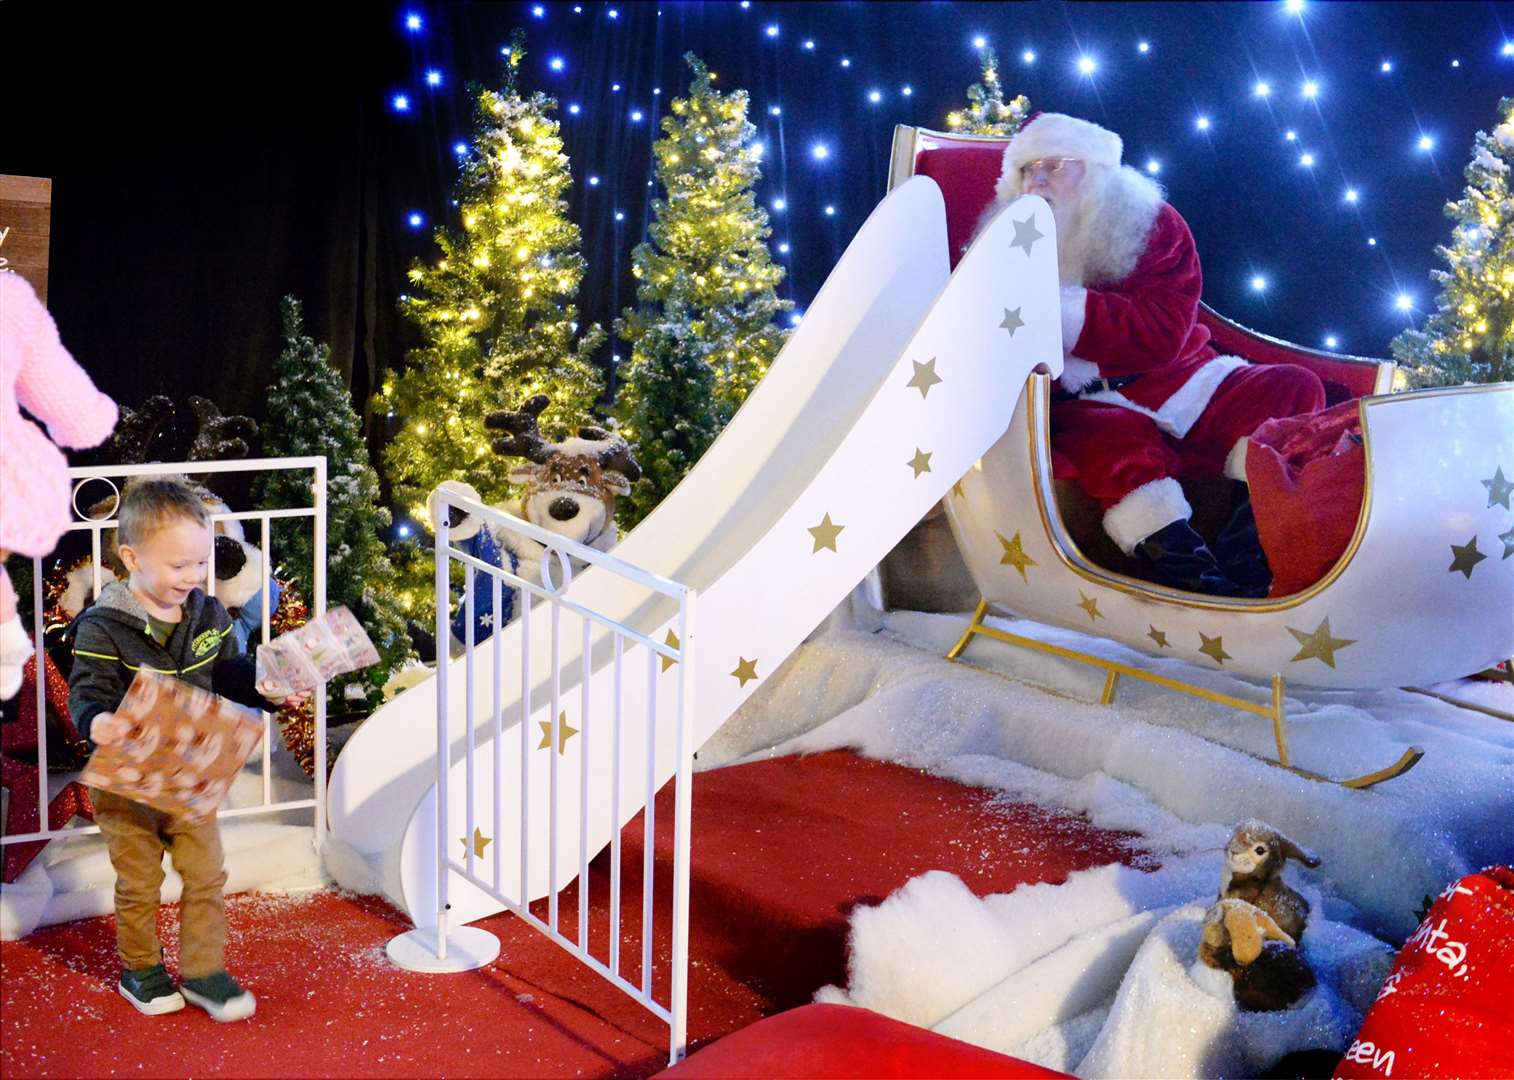 Logan Gordon collects his gifts at the bottom of the slide.